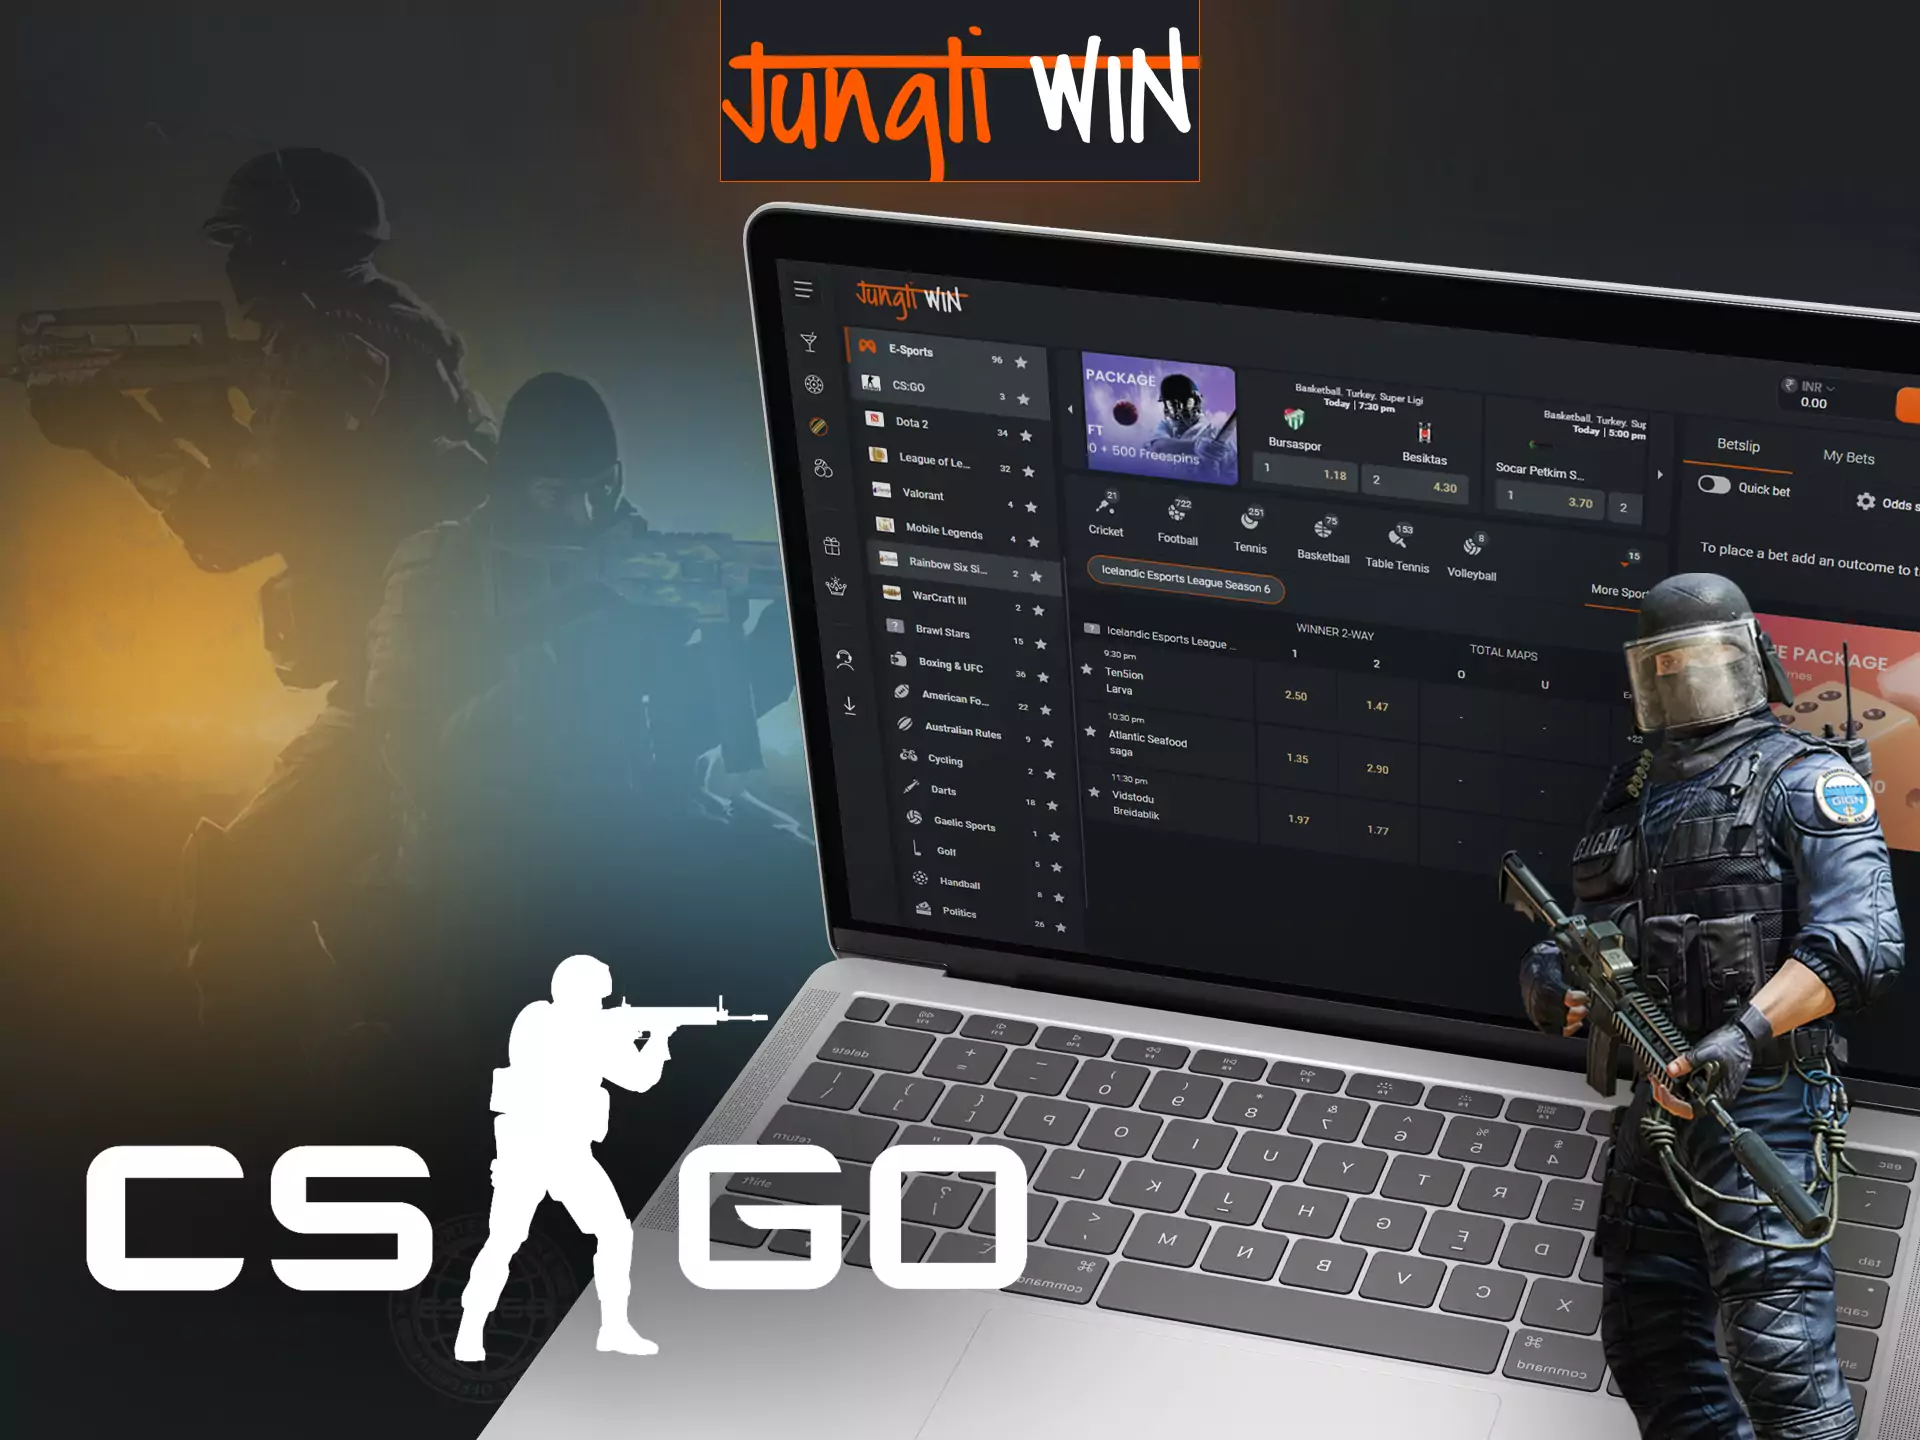 With Junglewin, place bets on CS:GO.